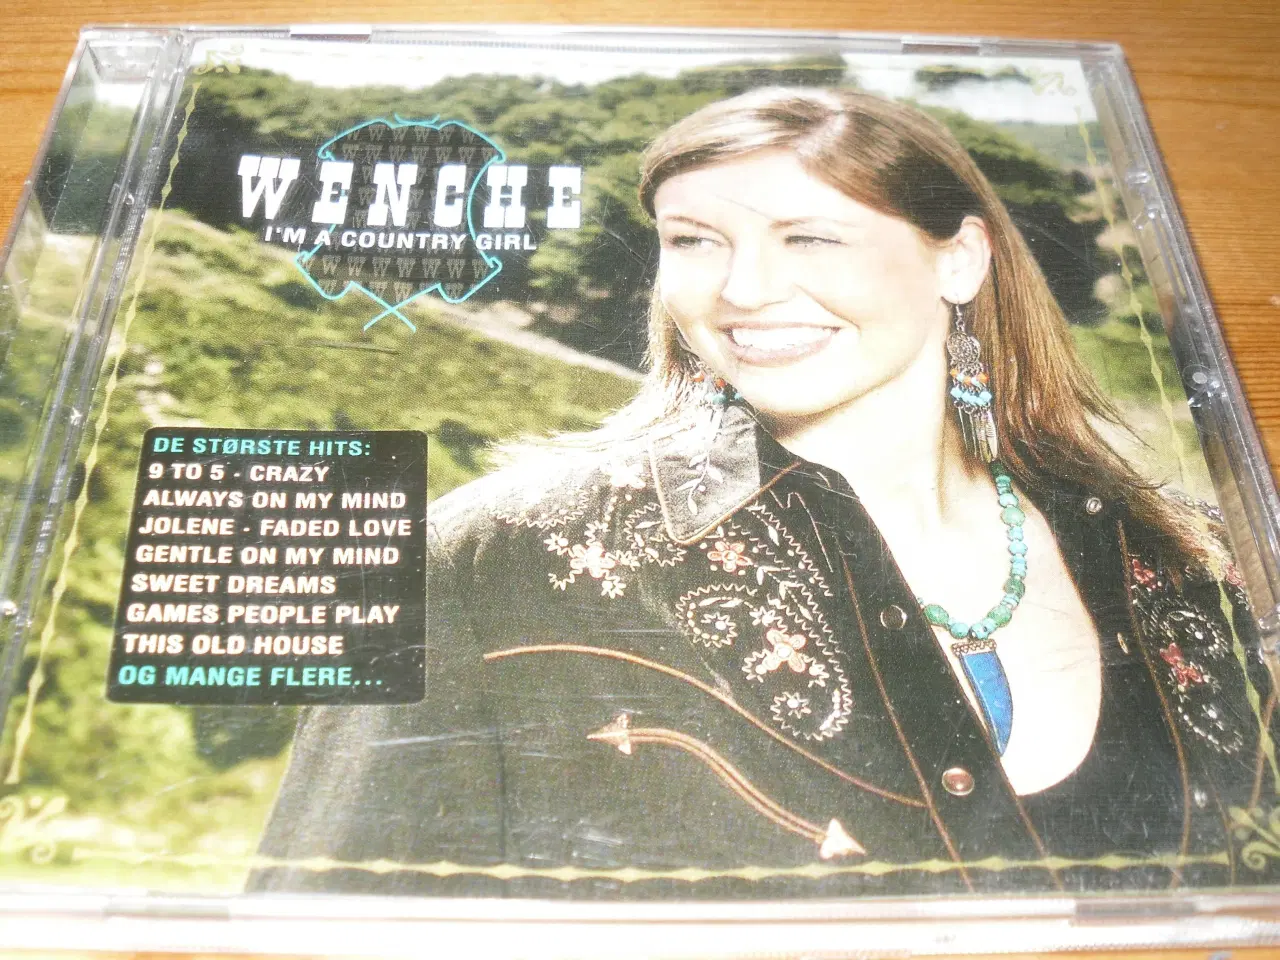 Billede 1 - WENCHE; I`m a Country Girl.